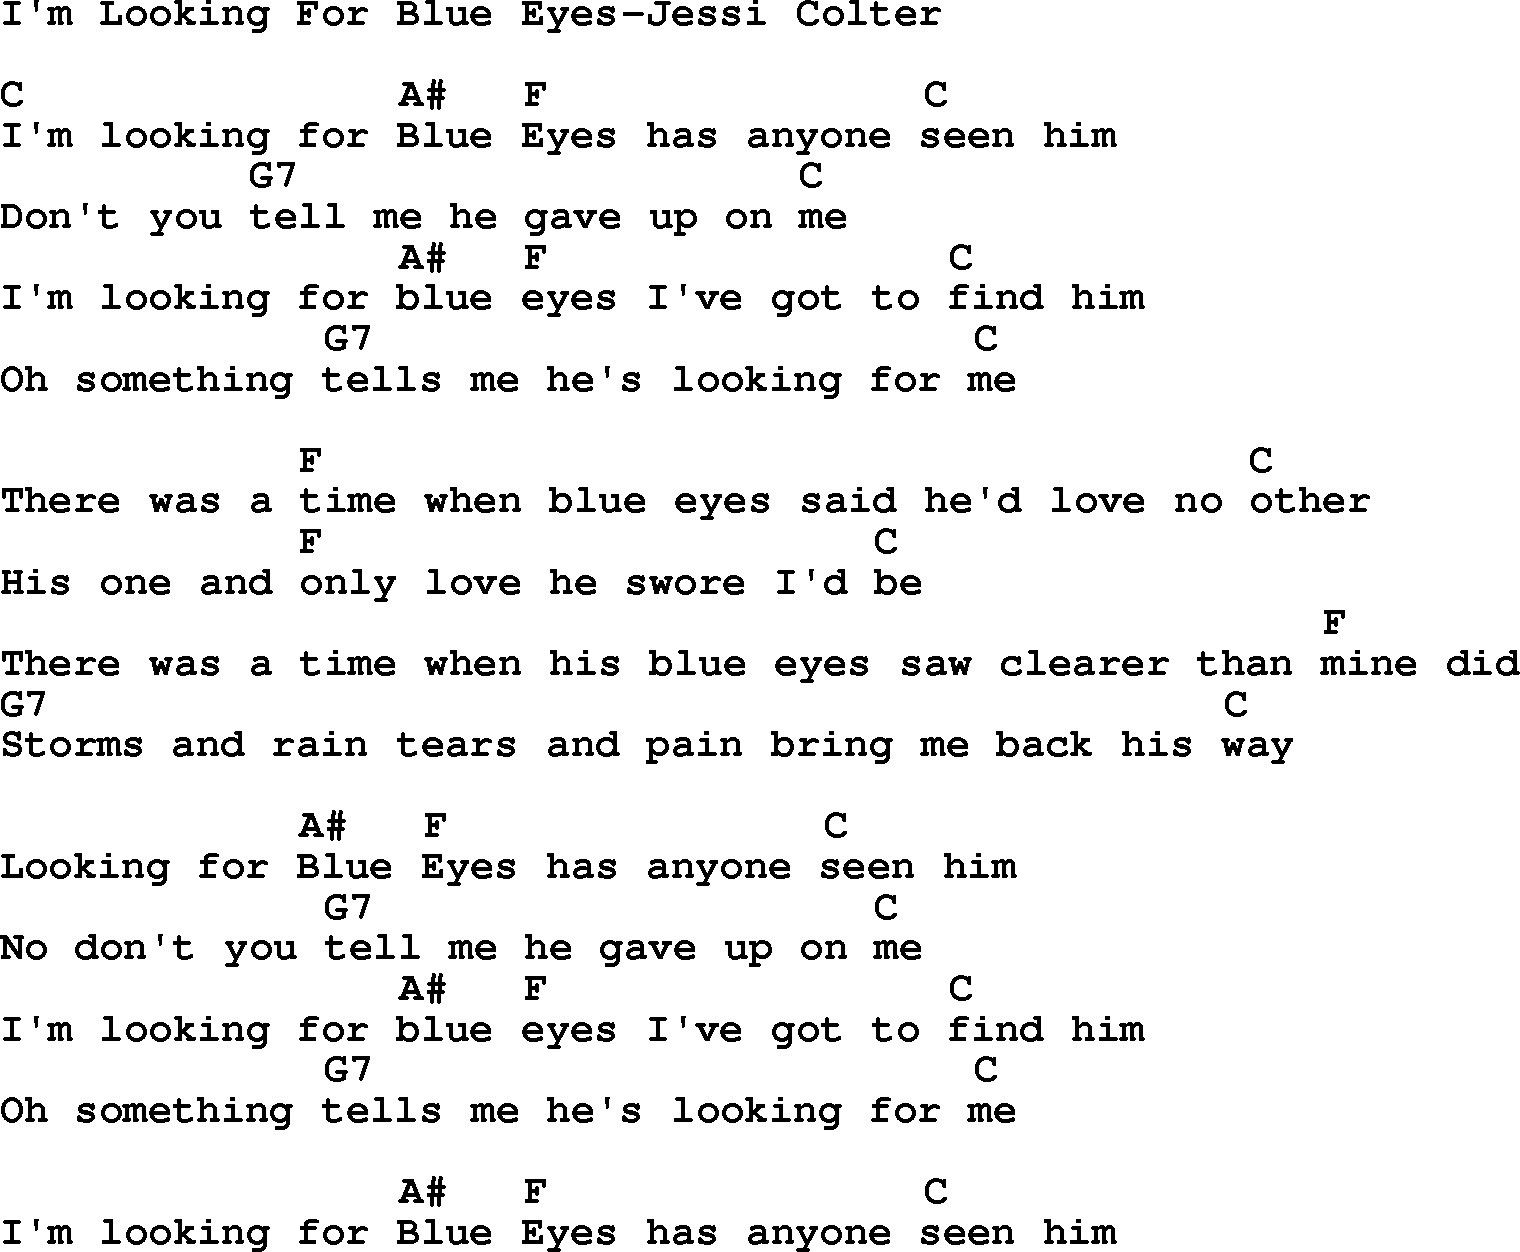 Country music song: I'm Looking For Blue Eyes-Jessi Colter lyrics and chords